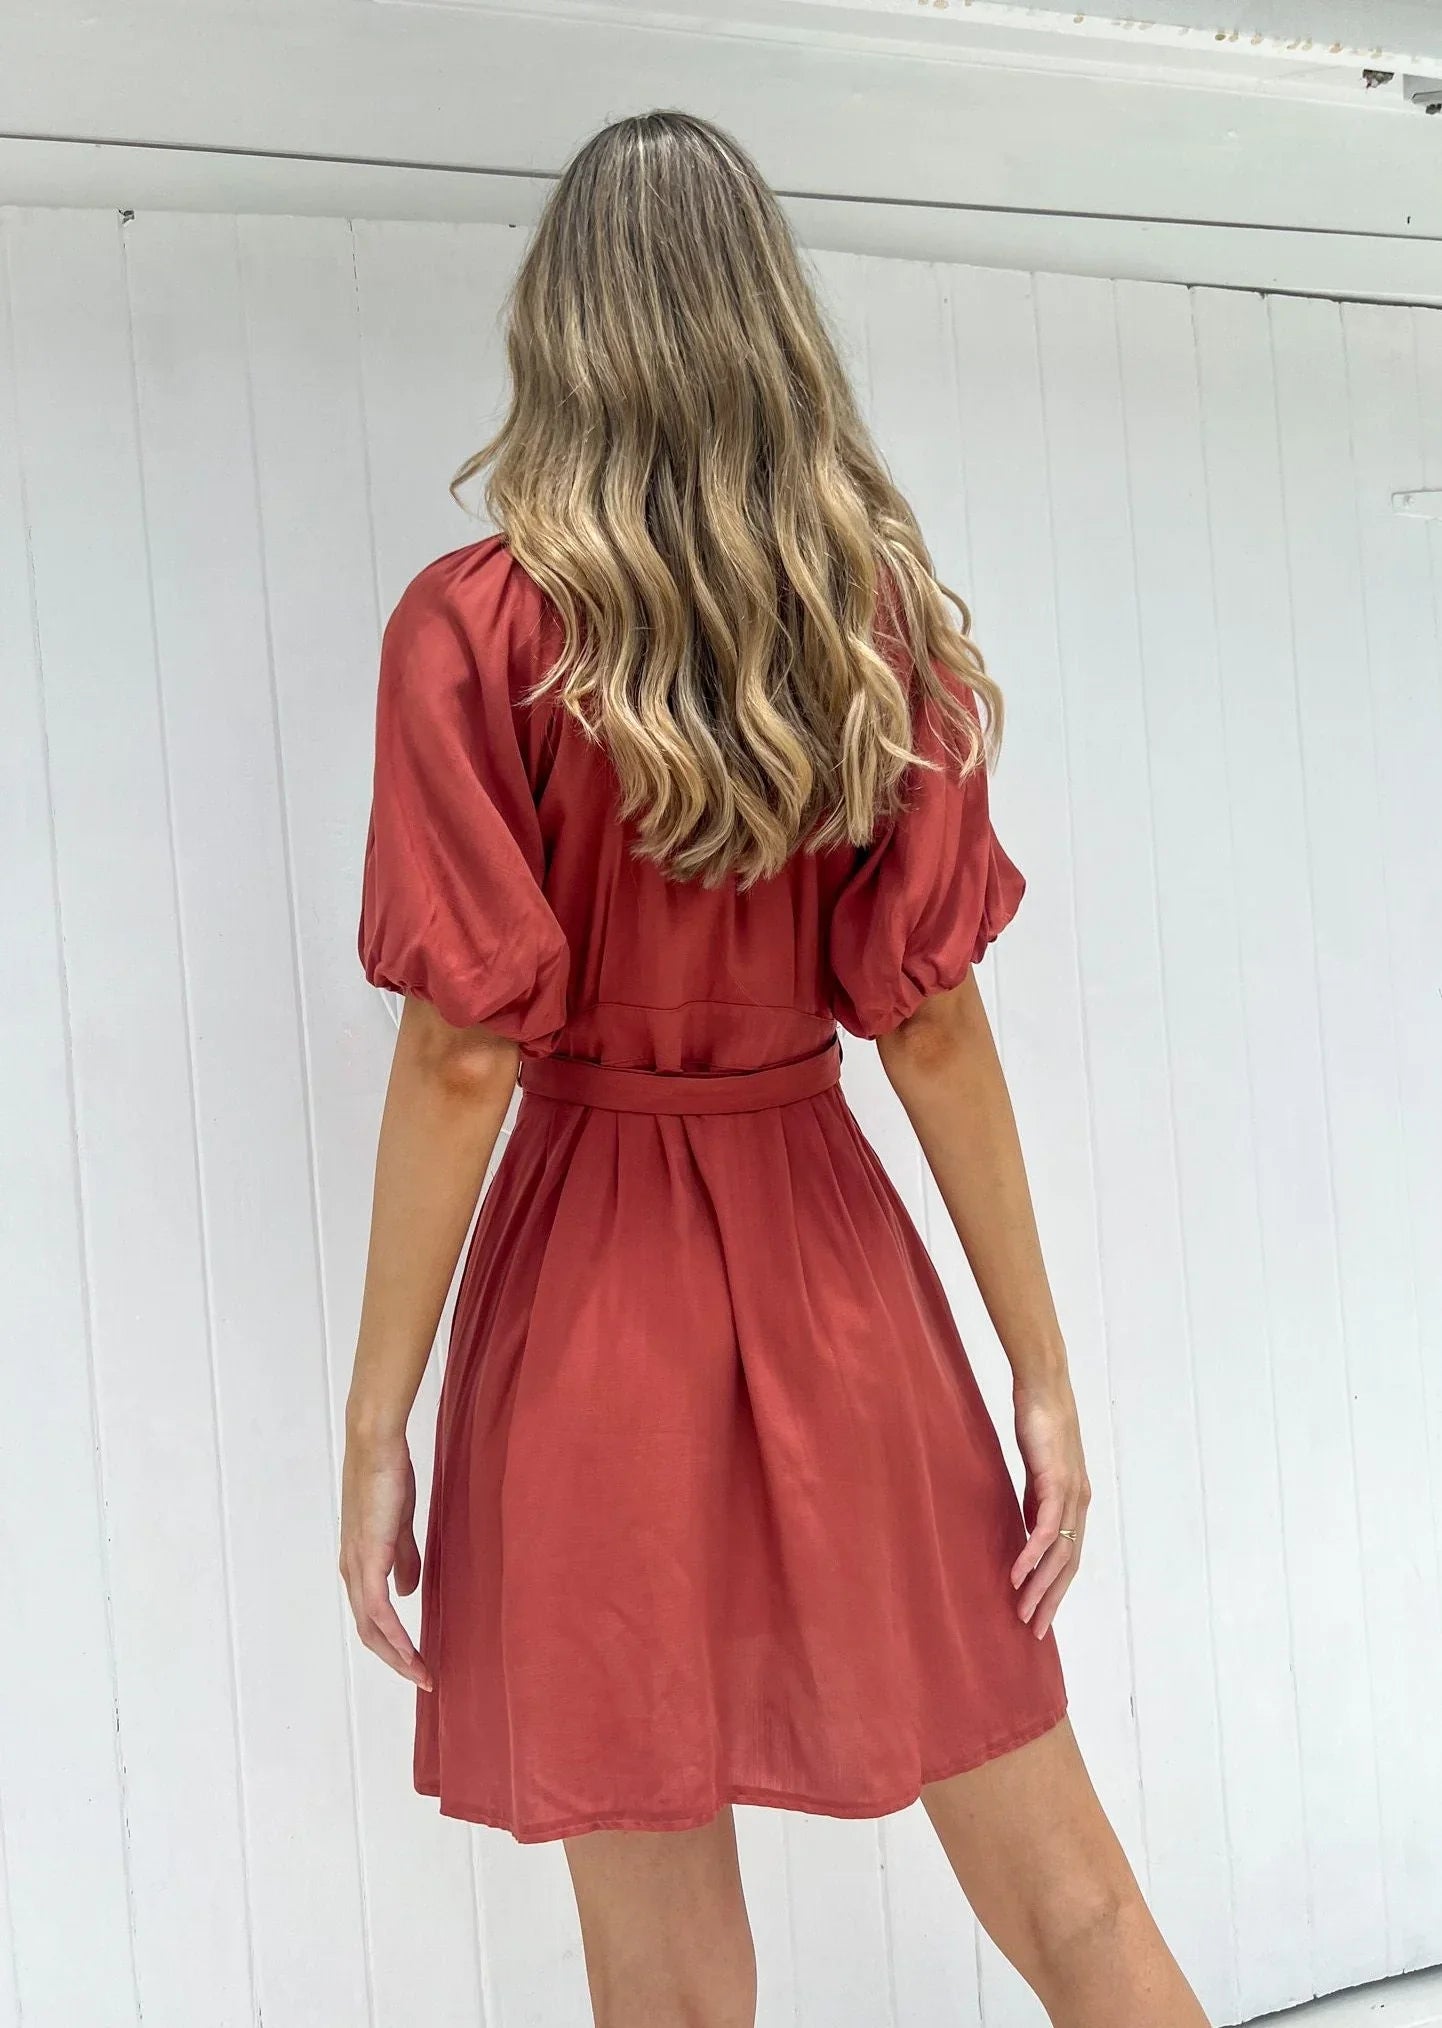 Aurora Mini Dress: Introducing the Aurora Mini Dress - a chic and contemporary dress with on-trend balloon sleeves, a belt, and a playful mini length. The new style of the dress makes  - Ciao Bella Dresses - Mylk the Label